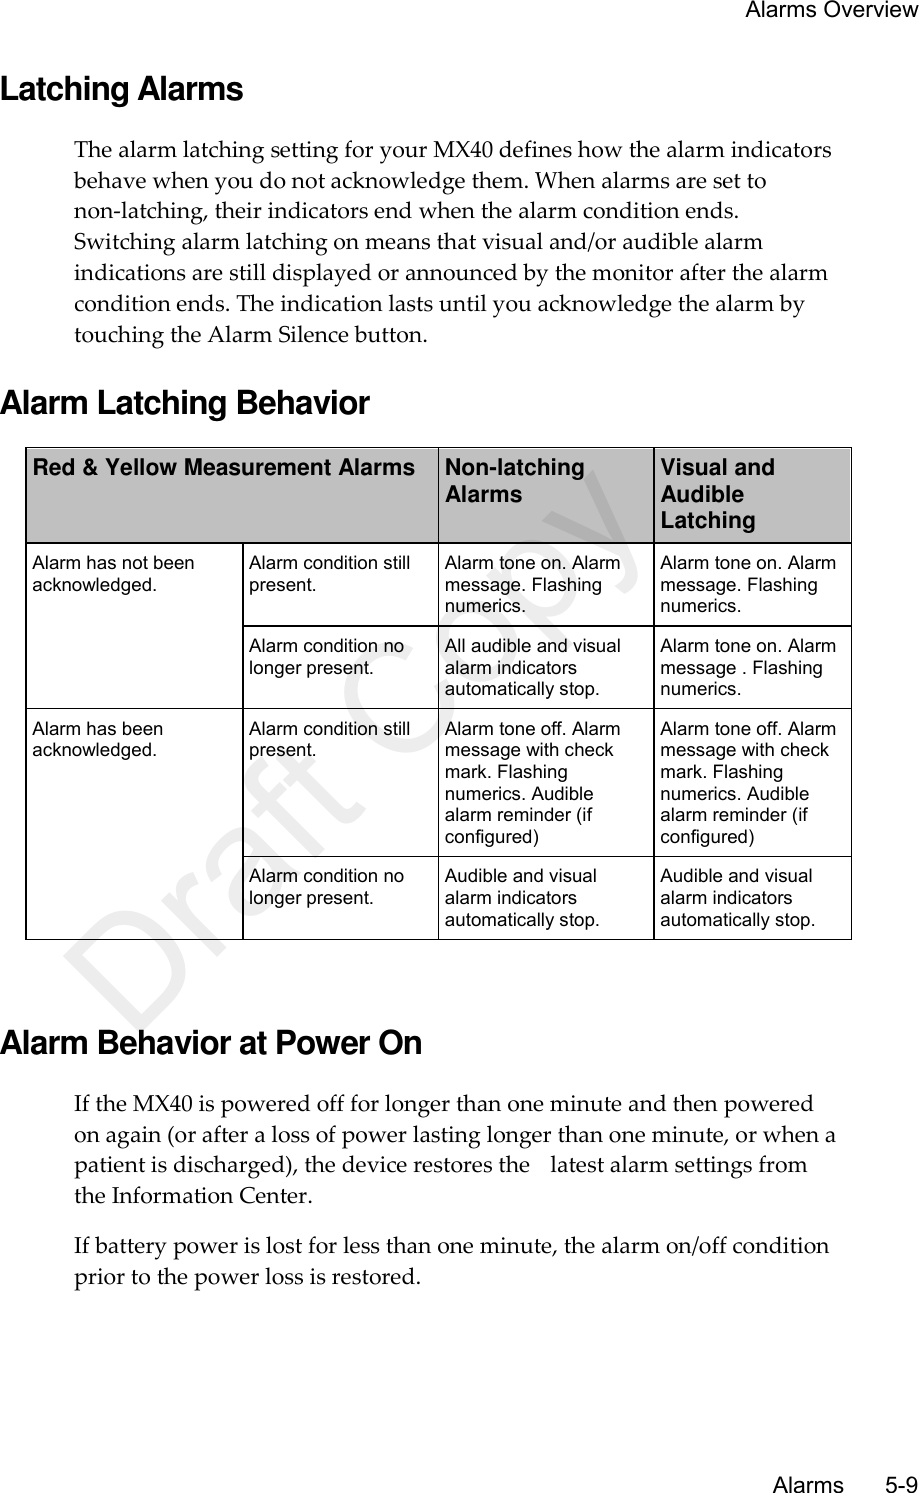     Alarms Overview       Alarms       5-9 Latching Alarms The alarm latching setting for your MX40 defines how the alarm indicators behave when you do not acknowledge them. When alarms are set to non-latching, their indicators end when the alarm condition ends. Switching alarm latching on means that visual and/or audible alarm indications are still displayed or announced by the monitor after the alarm condition ends. The indication lasts until you acknowledge the alarm by touching the Alarm Silence button.  Alarm Latching Behavior Red &amp; Yellow Measurement Alarms  Non-latching Alarms Visual and Audible Latching Alarm has not been acknowledged.  Alarm condition still present. Alarm tone on. Alarm message. Flashing numerics. Alarm tone on. Alarm message. Flashing numerics. Alarm condition no longer present. All audible and visual alarm indicators automatically stop. Alarm tone on. Alarm message . Flashing numerics. Alarm has been acknowledged.  Alarm condition still present. Alarm tone off. Alarm message with check mark. Flashing numerics. Audible alarm reminder (if configured) Alarm tone off. Alarm message with check mark. Flashing numerics. Audible alarm reminder (if configured) Alarm condition no longer present. Audible and visual alarm indicators automatically stop. Audible and visual alarm indicators automatically stop.   Alarm Behavior at Power On If the MX40 is powered off for longer than one minute and then powered on again (or after a loss of power lasting longer than one minute, or when a patient is discharged), the device restores the    latest alarm settings from the Information Center. If battery power is lost for less than one minute, the alarm on/off condition prior to the power loss is restored.  Draft Copy